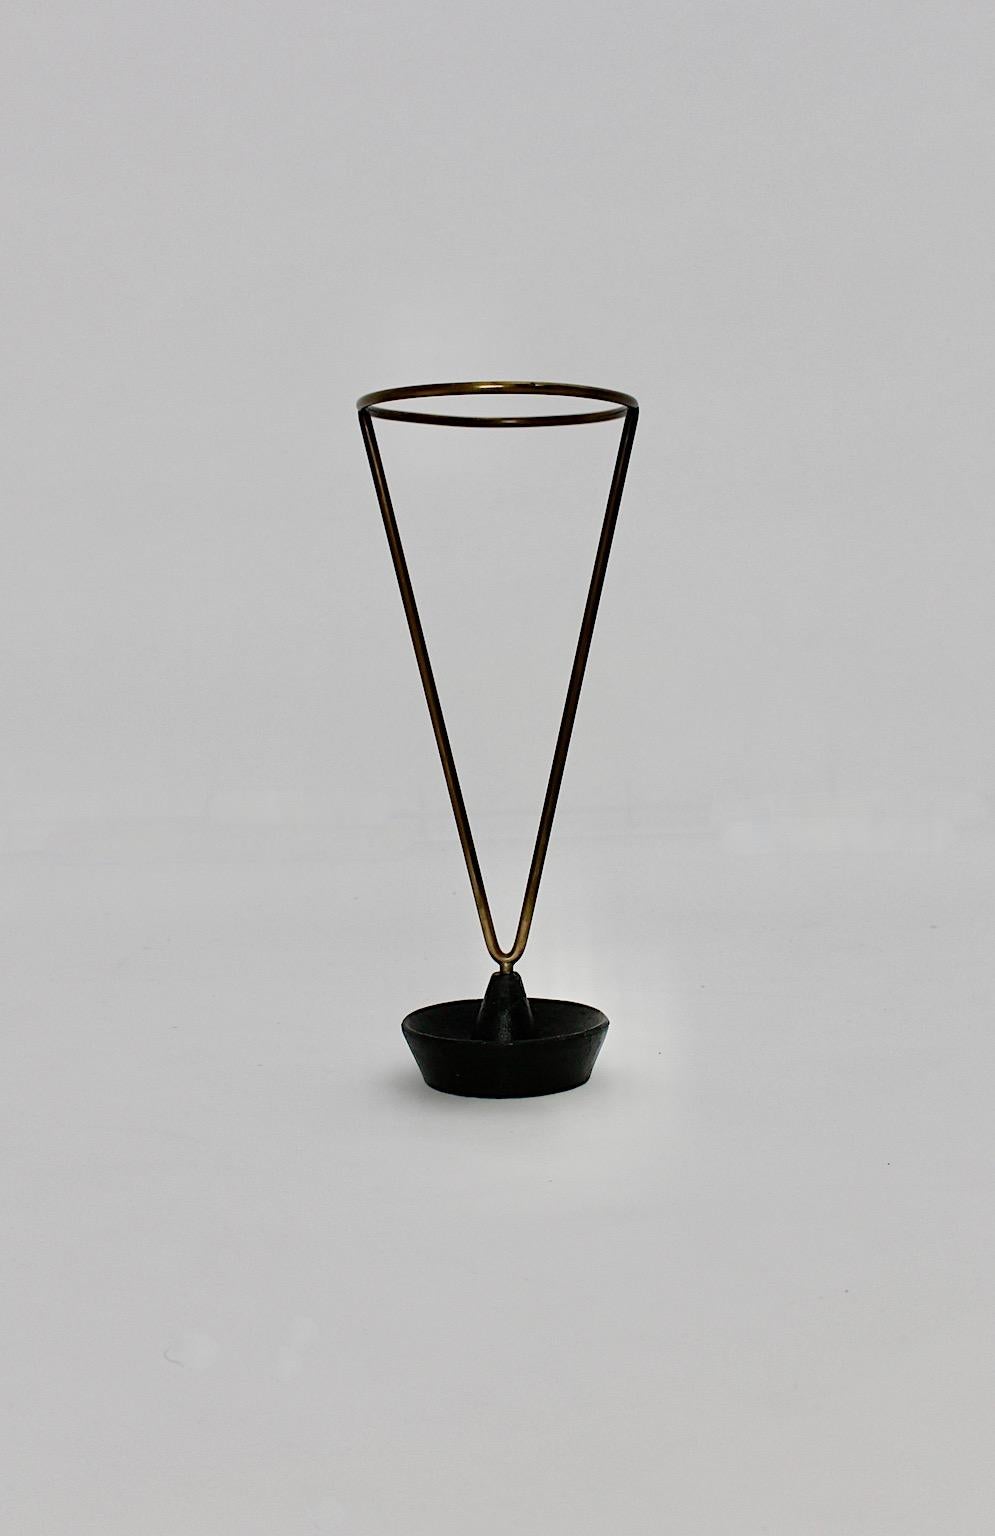 Mid-Century Modern vintage authentic umbrella stand or cane holder by Carl Auböck for workshop Auböck, 1950s Austria.
The authentic umbrella stand is in original condition with beloved signs of age and use like patina.
The wonderful umbrella stand